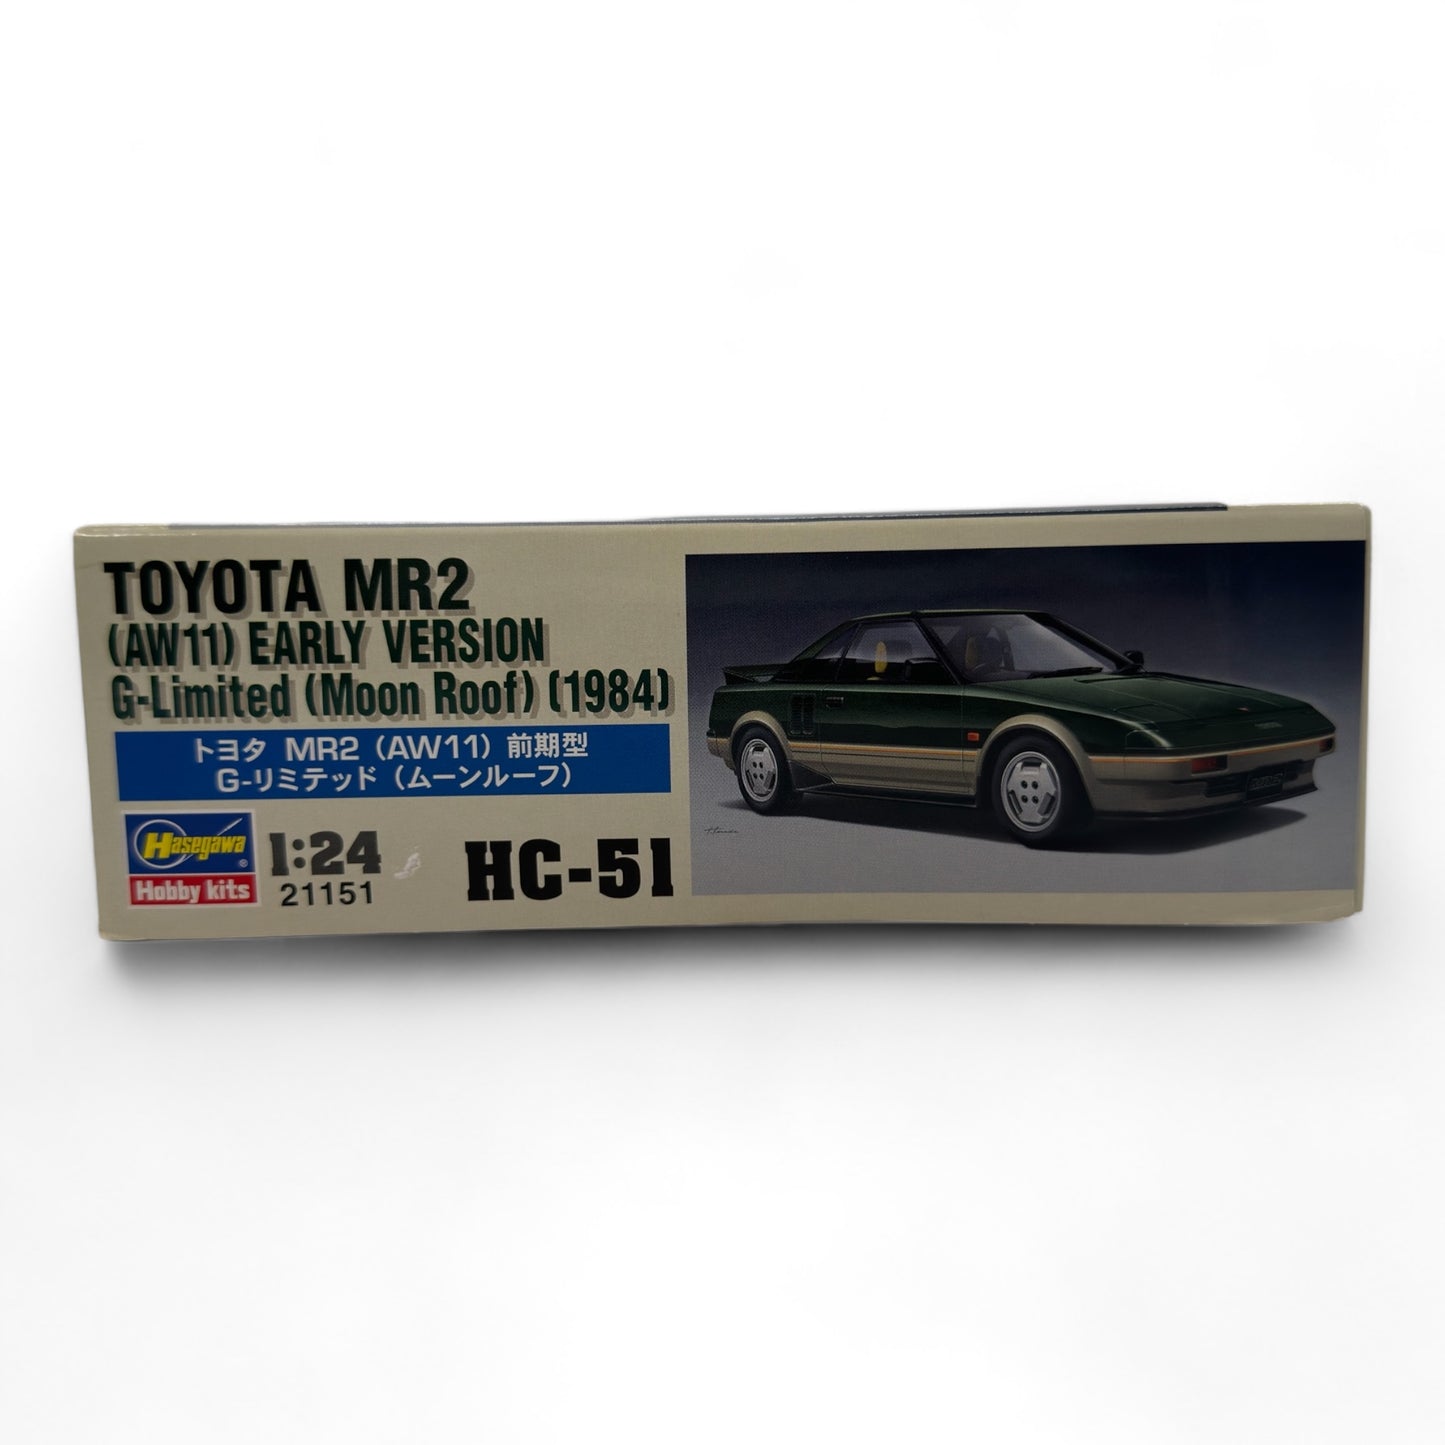 Toyota MR2 (AW11) Early Version G-limited (Moon Roof) (1984) 1/24 - Hasegawa